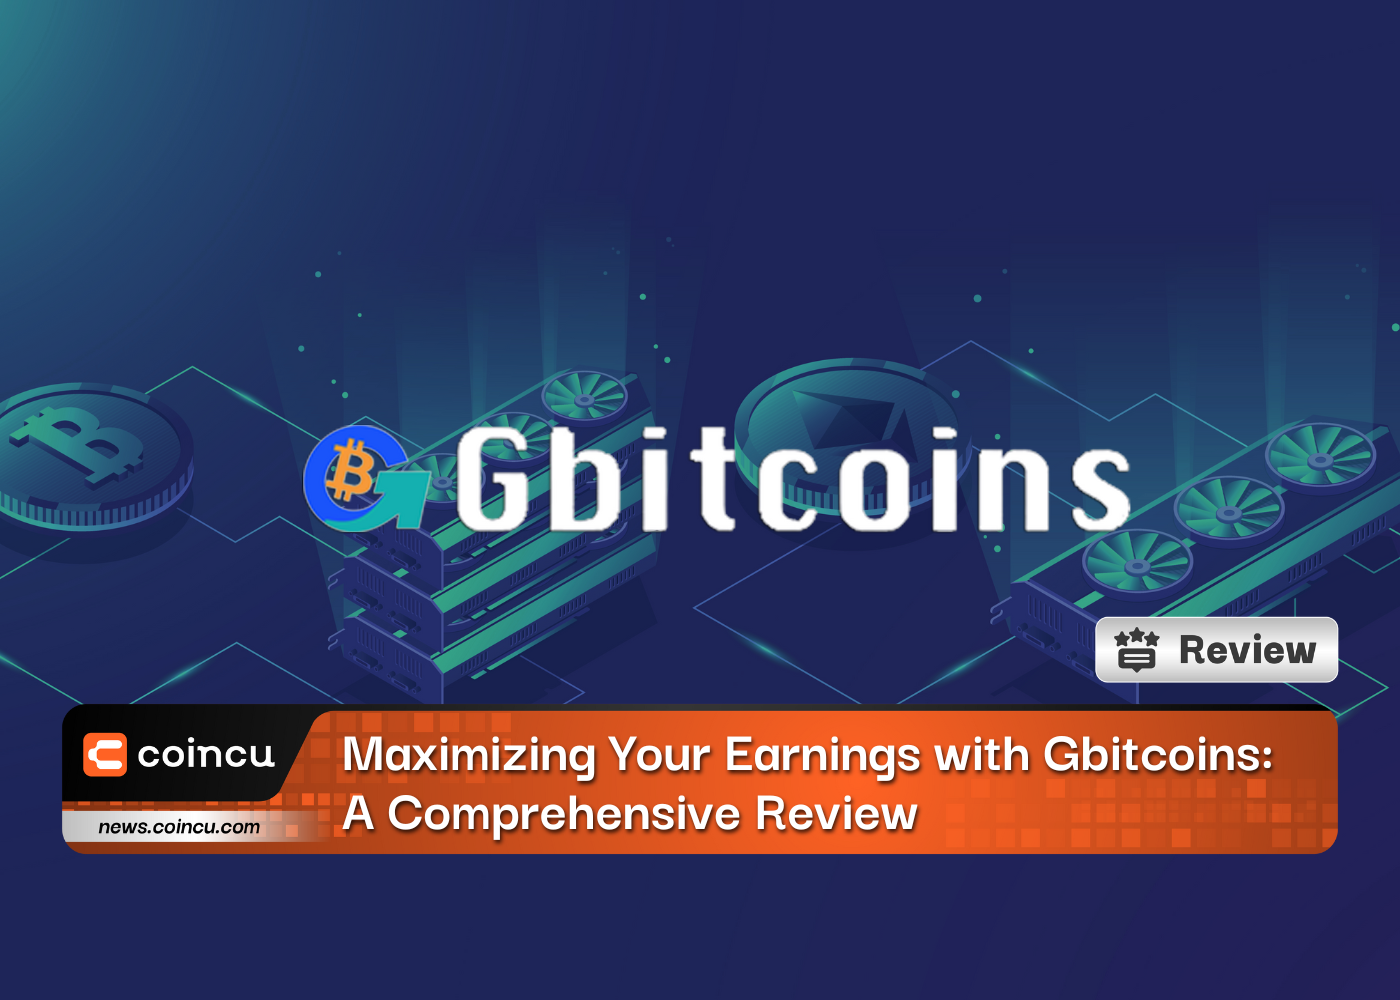 Maximizing Your Earnings with Gbitcoins: A Comprehensive Review